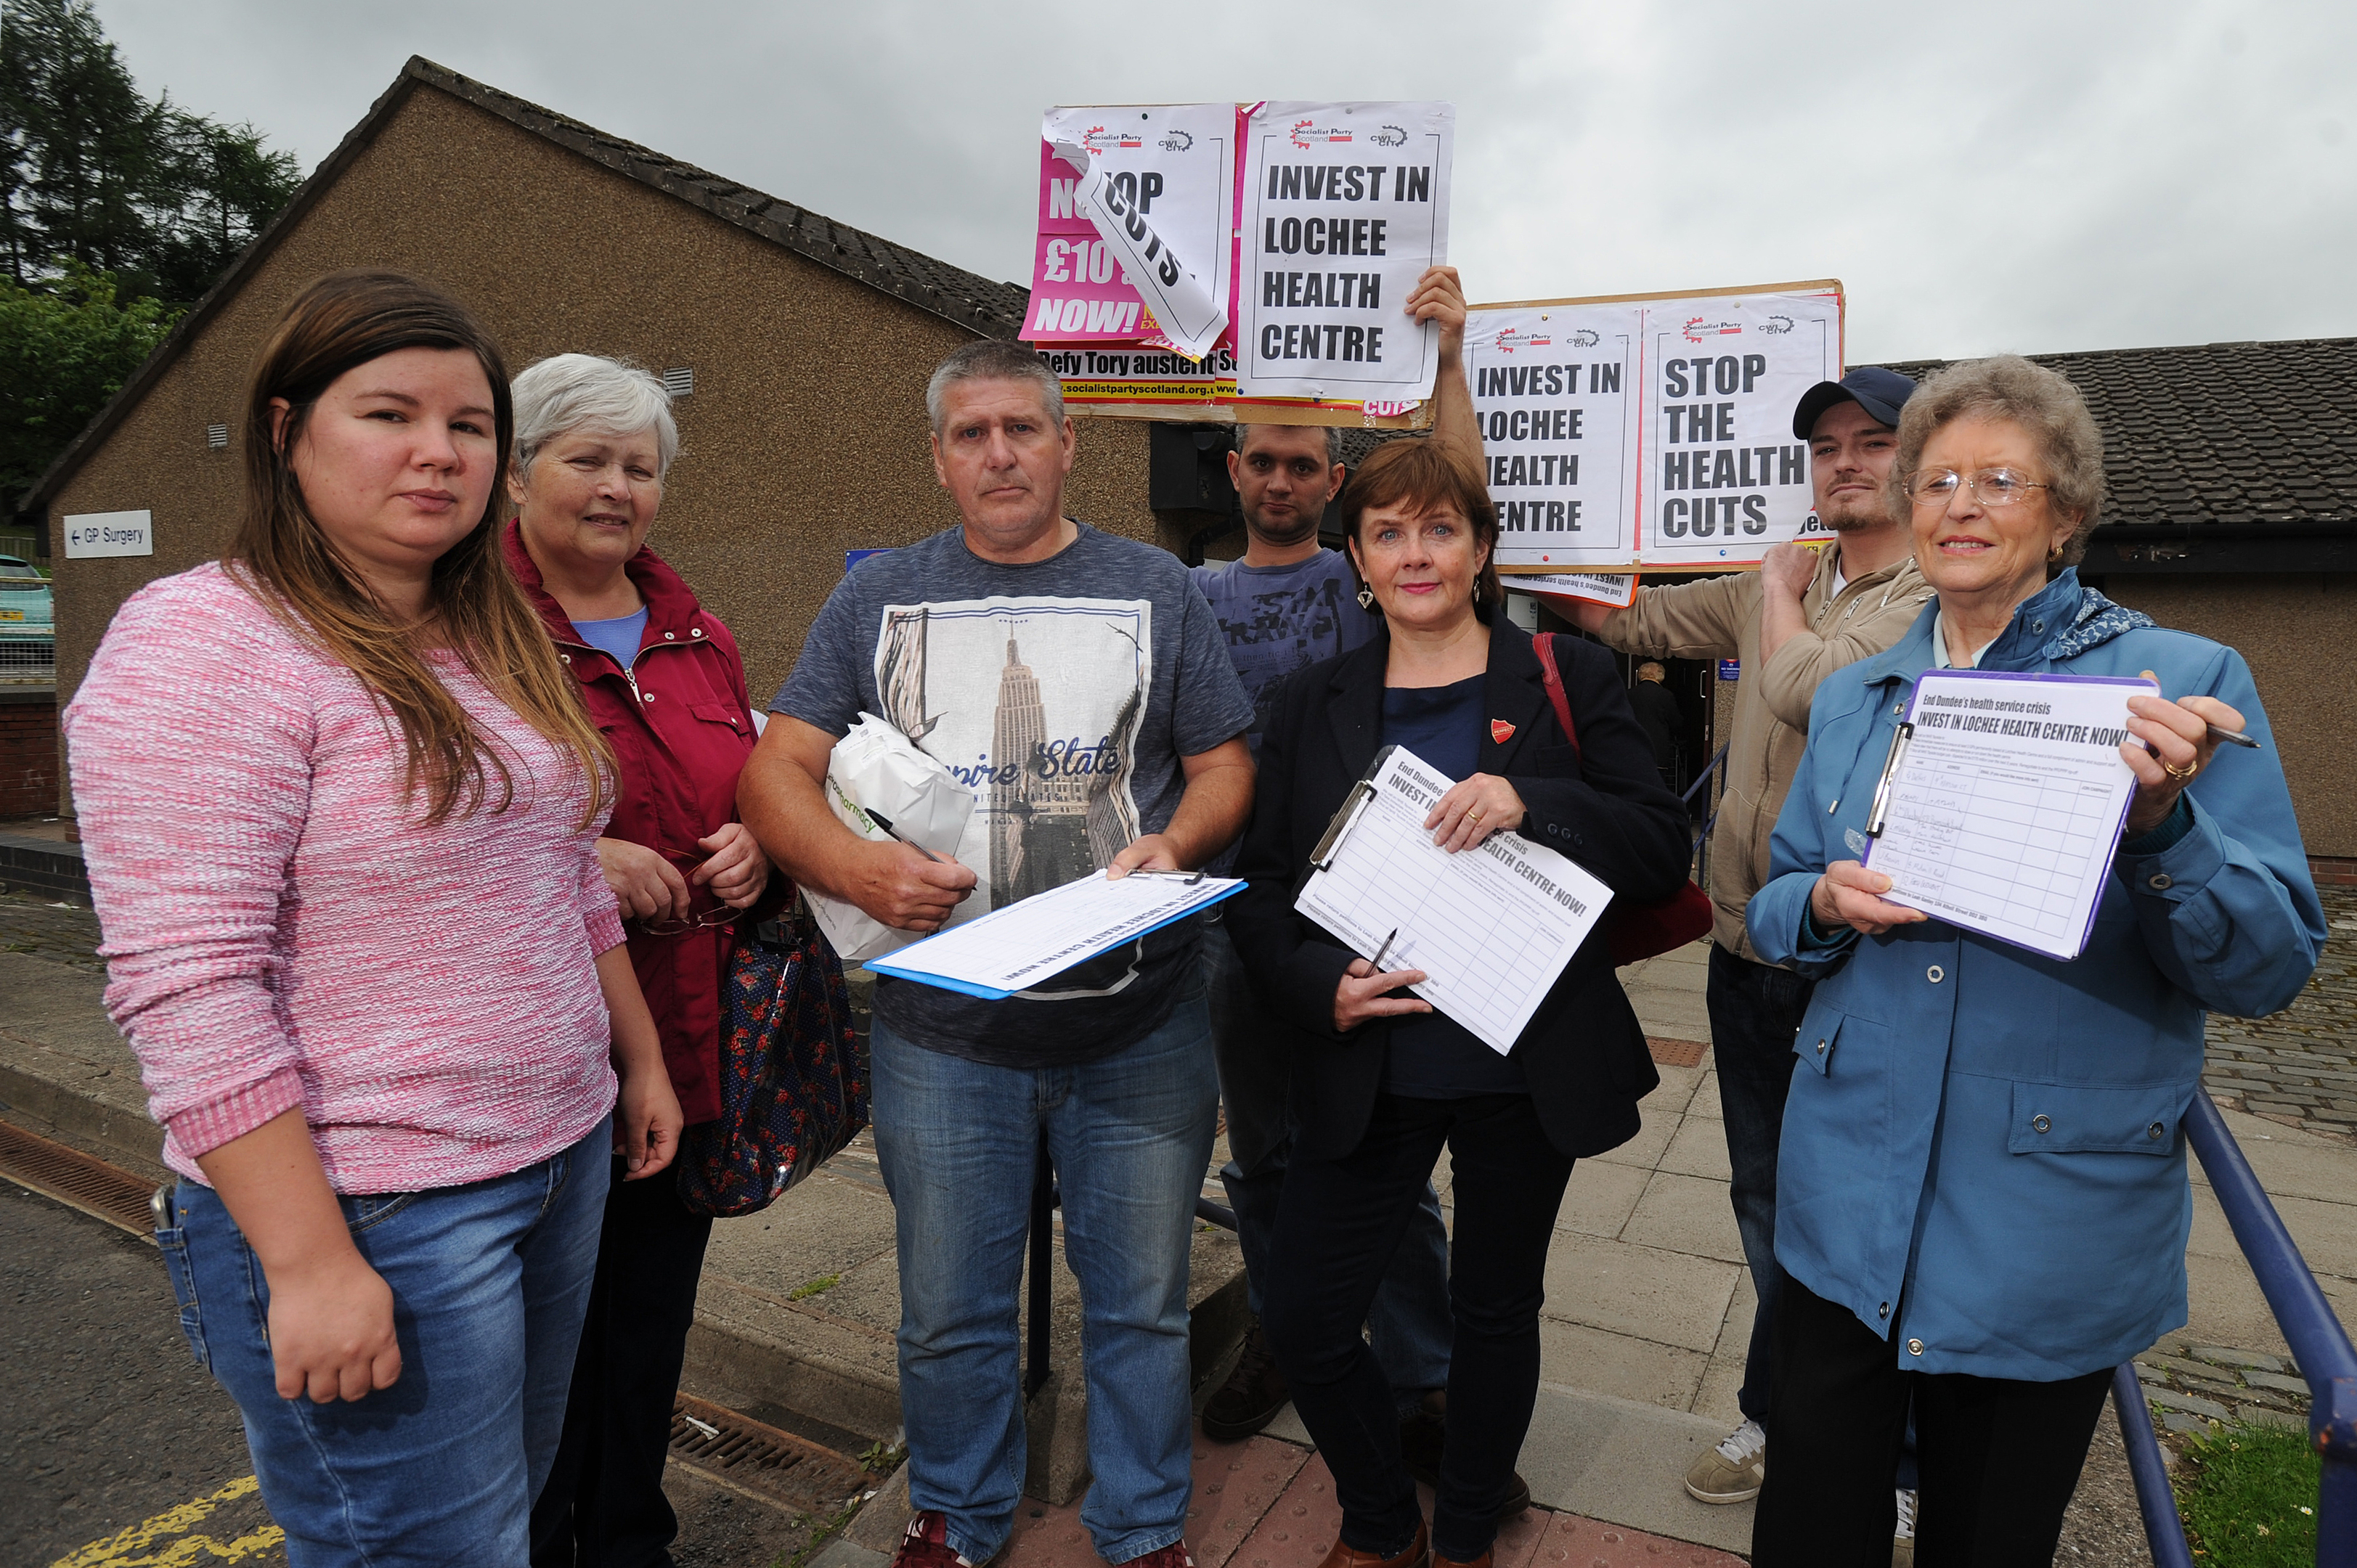 Members of Invest In Lochee Health Centre during a recent protest.